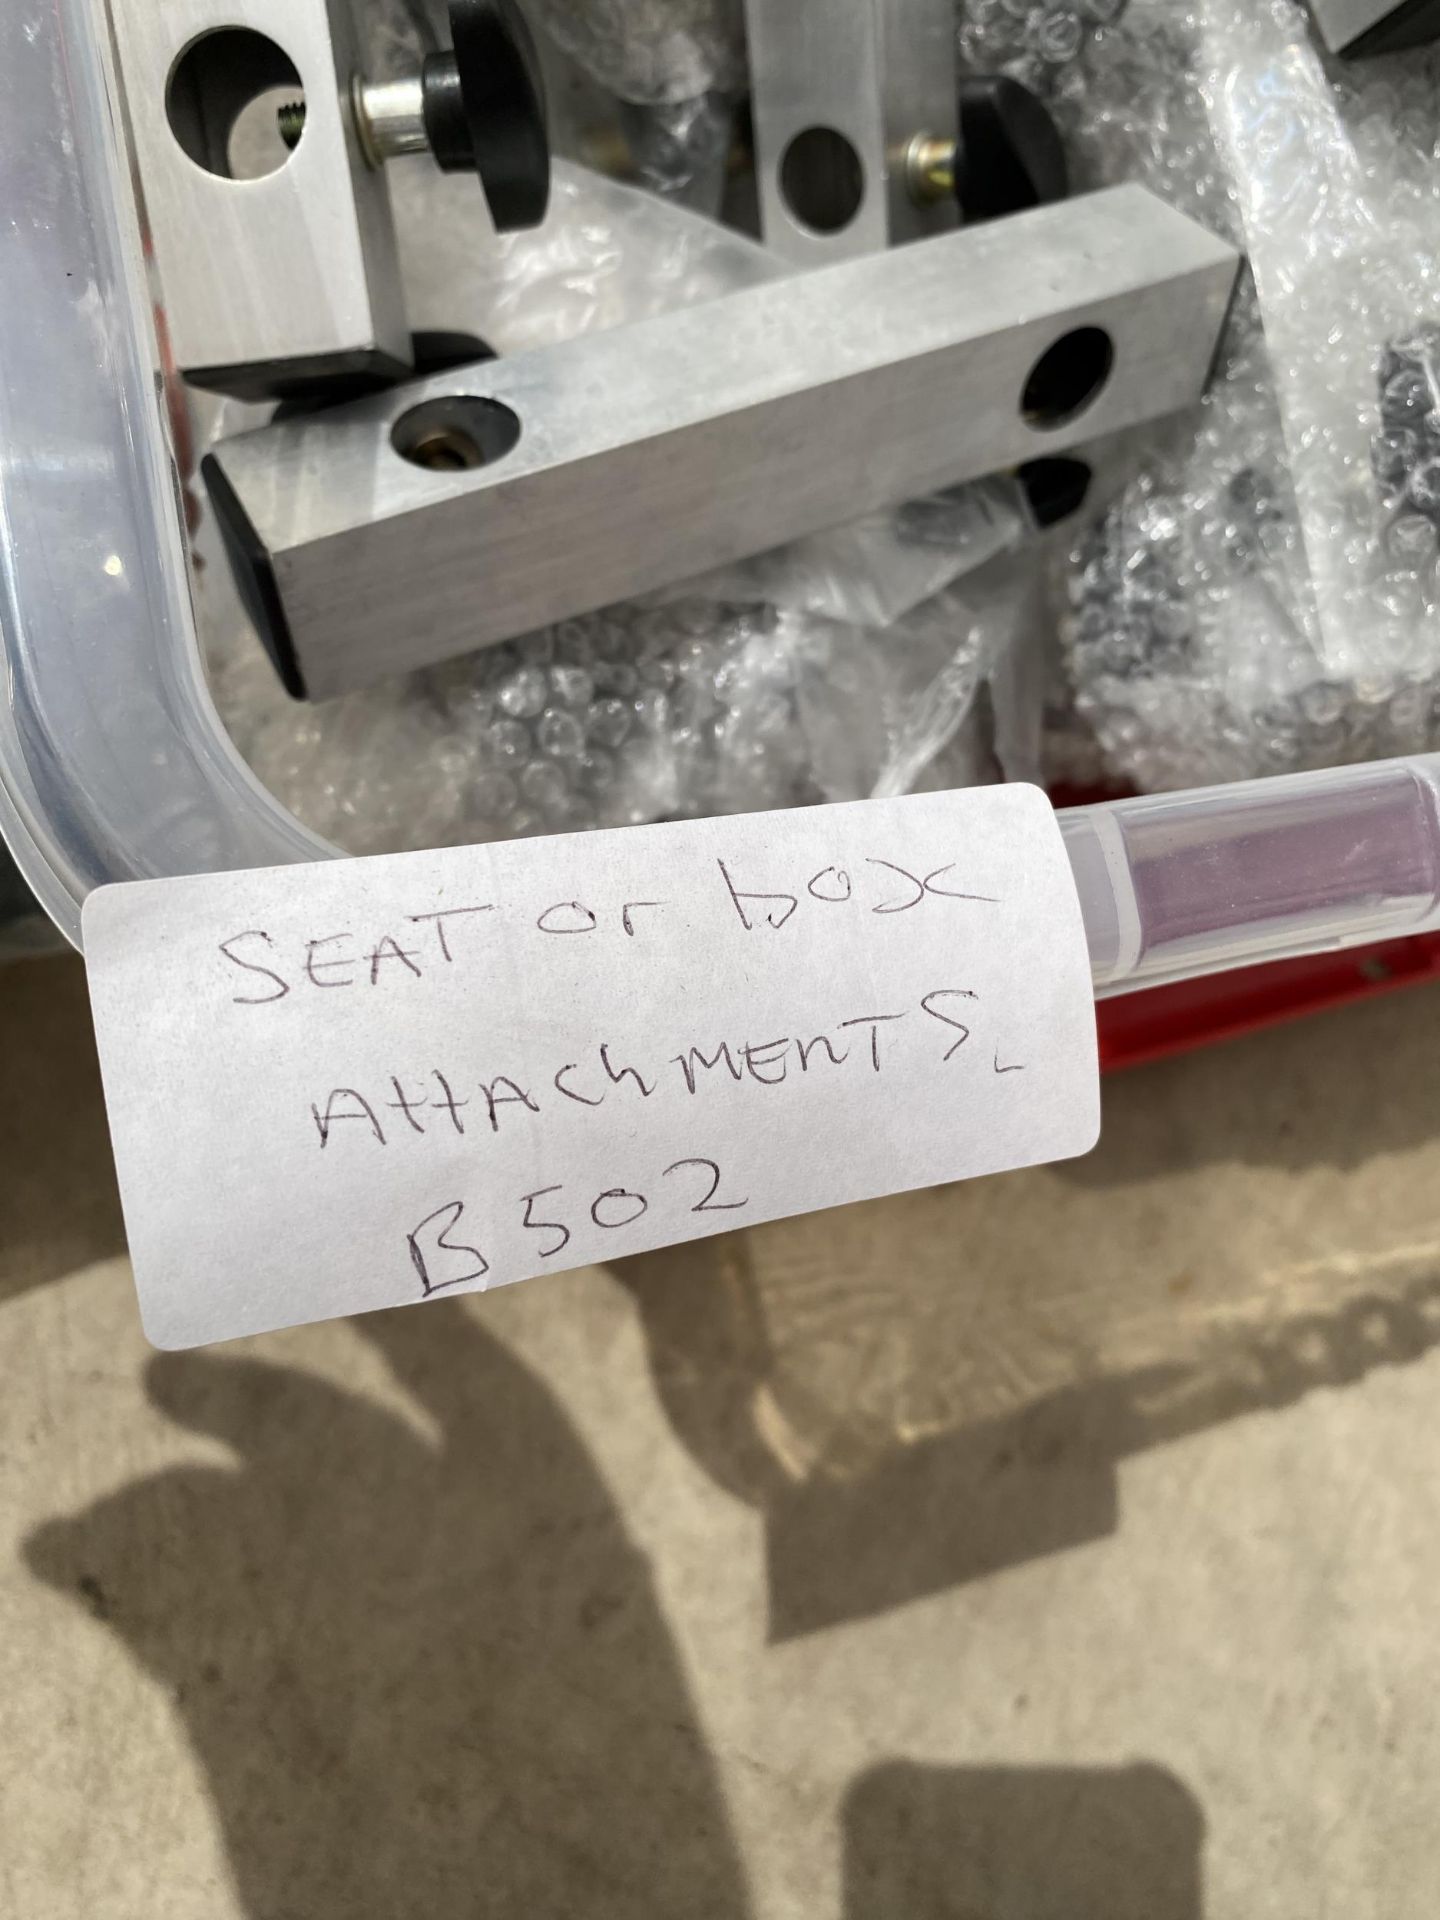 A BOX CONTAINING A LARGE NUMBER OF SEAT AND BOX ATTATCHMENTSACK (FROM A TACKLE SHOP CLEARANCE) - Bild 3 aus 3